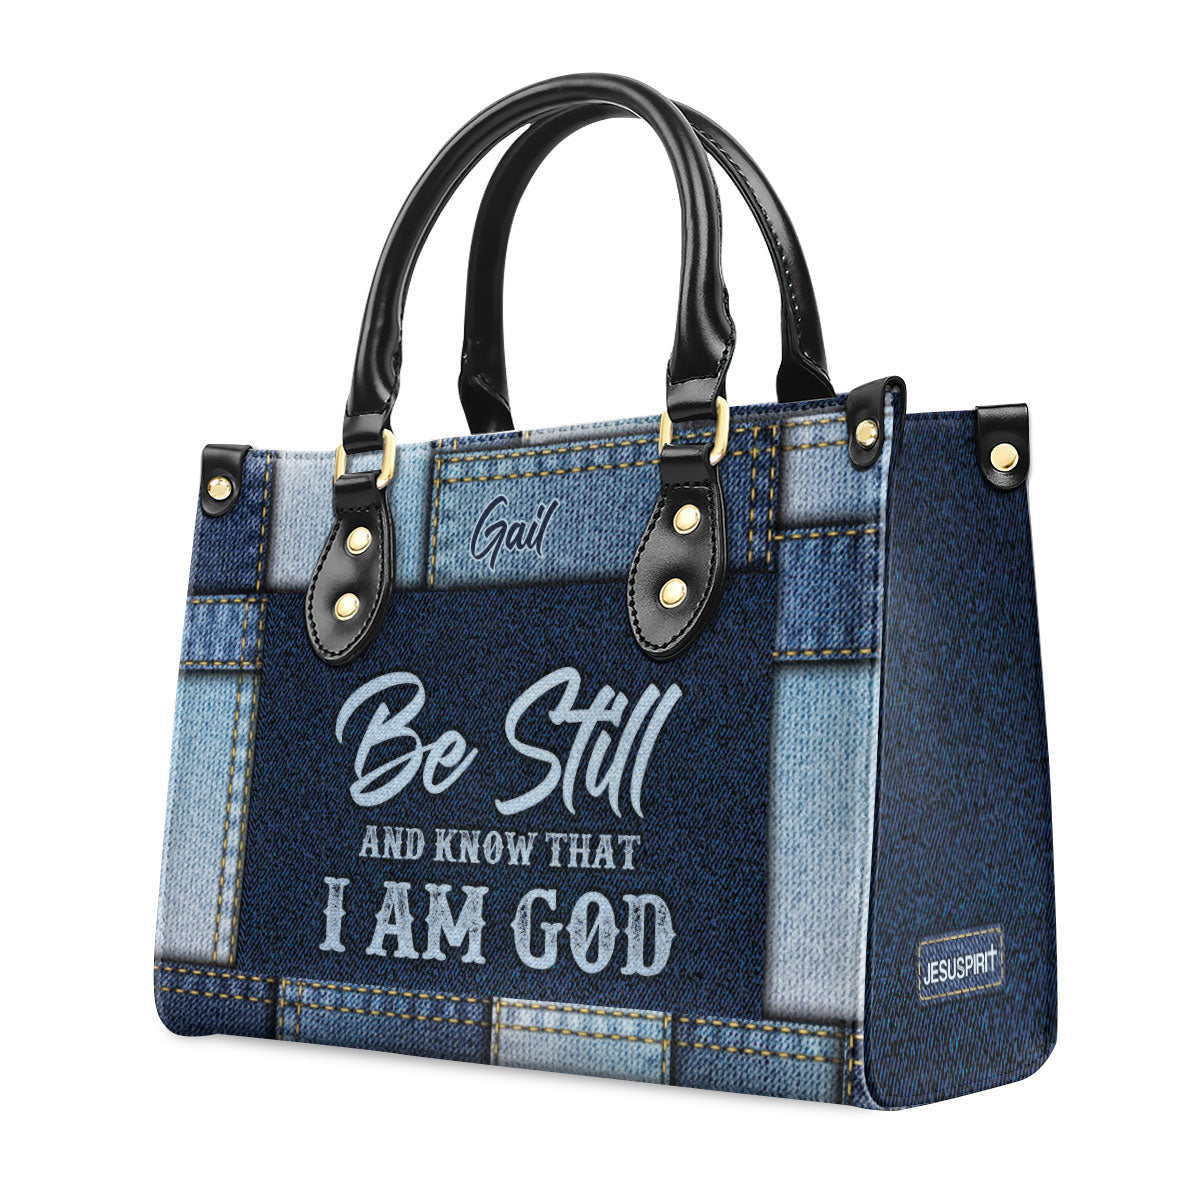 Unique Christian Leather Handbag - Be Still And Know That I Am God HN06